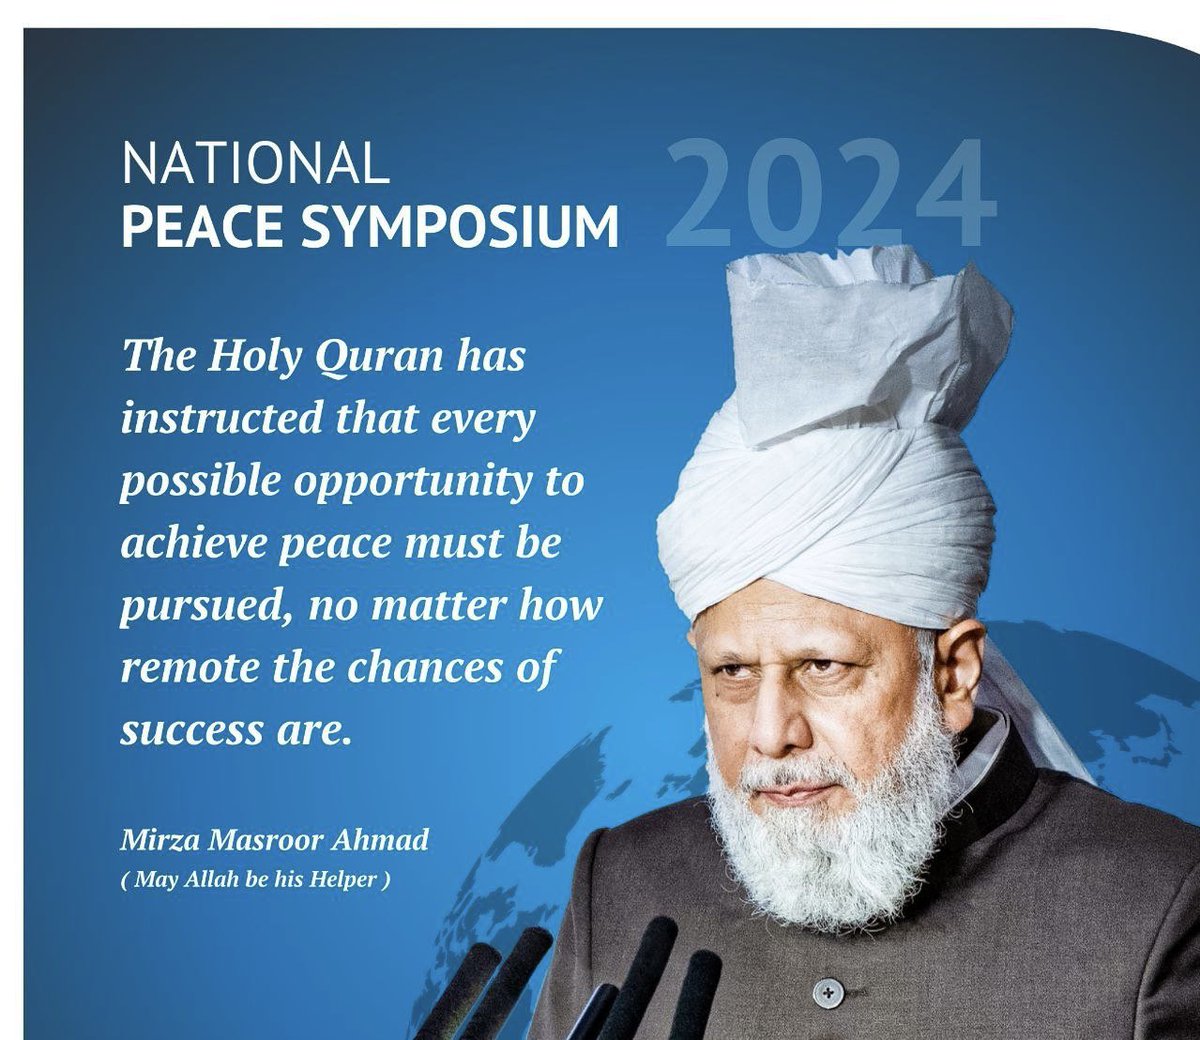 An honour to attend the Ahmadiyya Muslim Peace Conference & hear the inspiring address of HH Hazrat Mirza Masroor Ahmad - a powerful rallying call for the world leaders to act & deliver sustainable peace and resolve conflicts in Ukraine, Israel- Palestine and across the world.